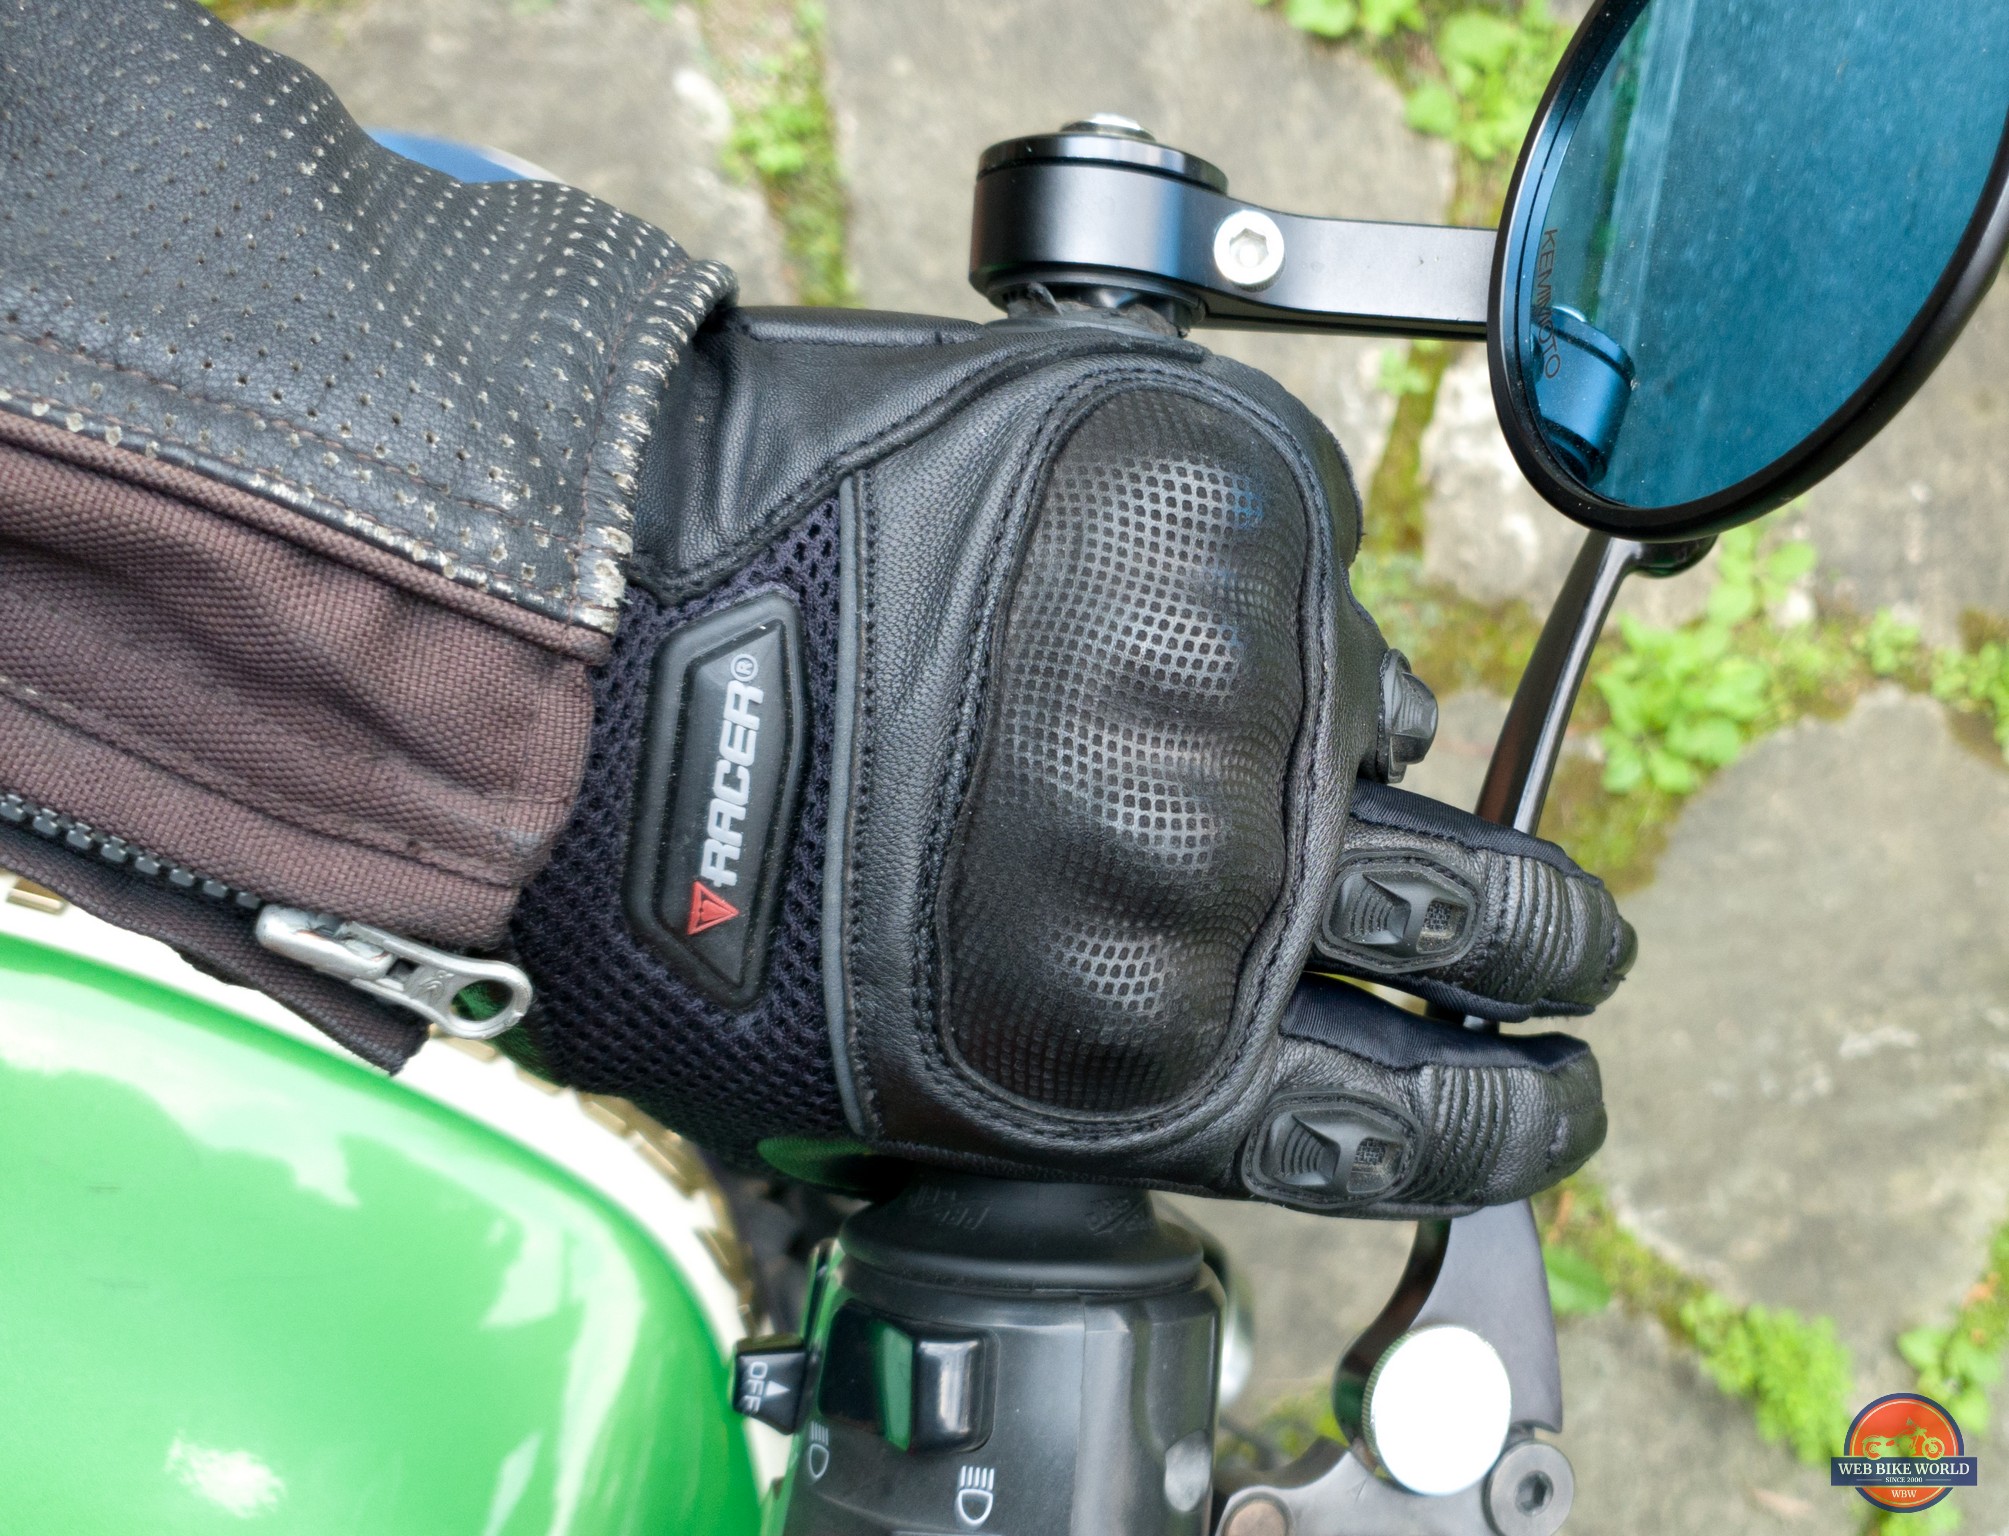 Top down view of Pitlane gloves on motorcycle handlebars